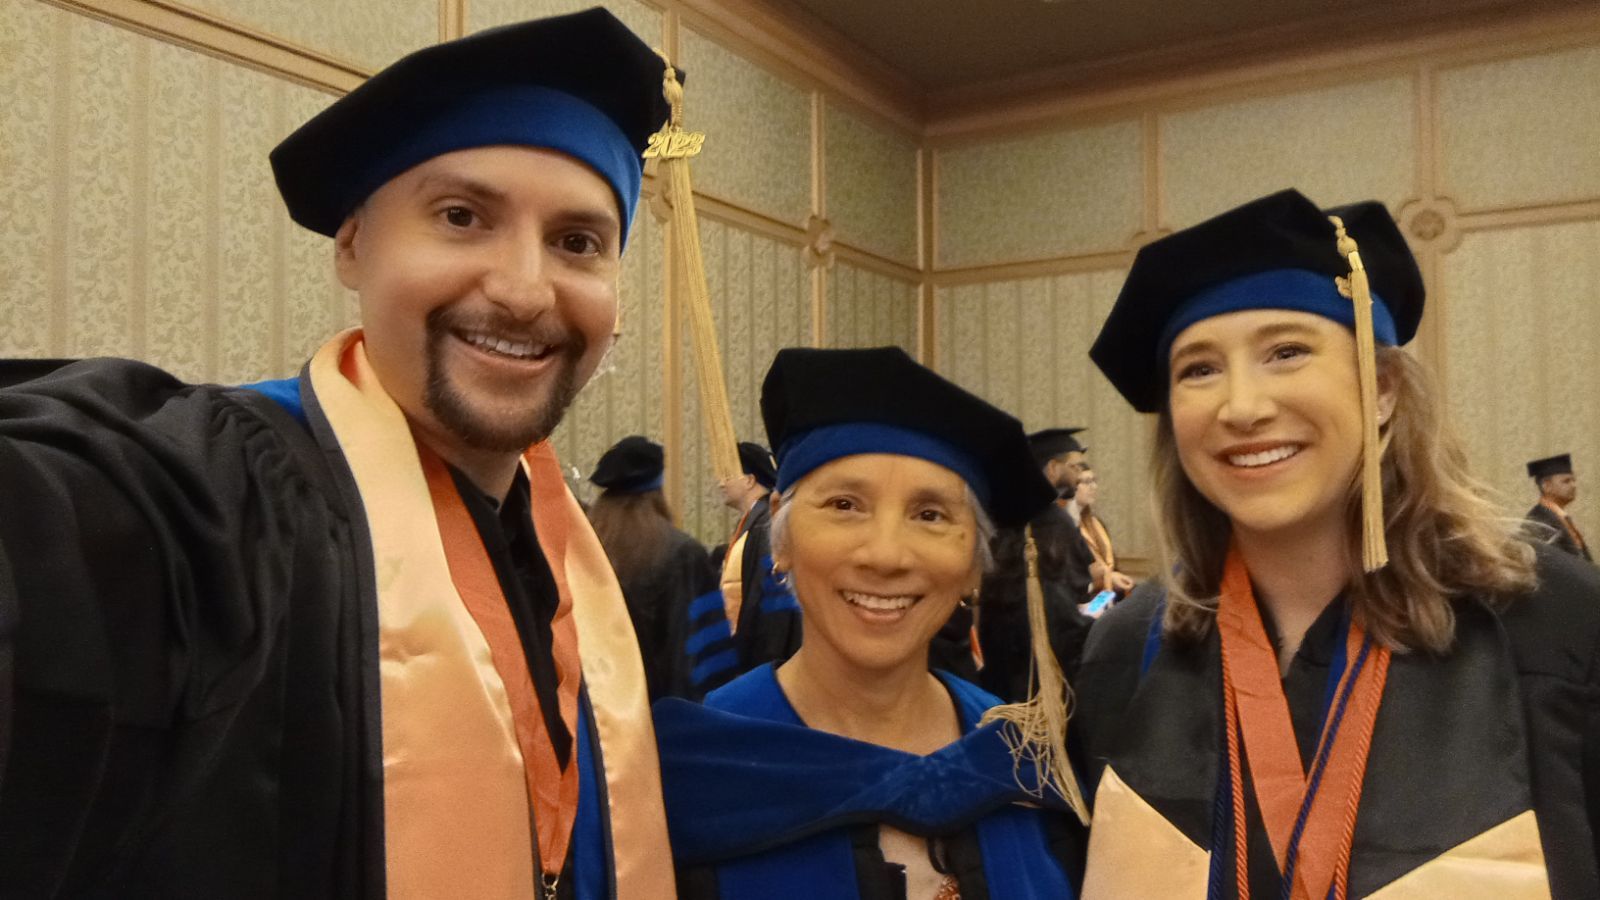 Robert Rodriguez, Rebeca Wong, and Paige Downer attending commencement